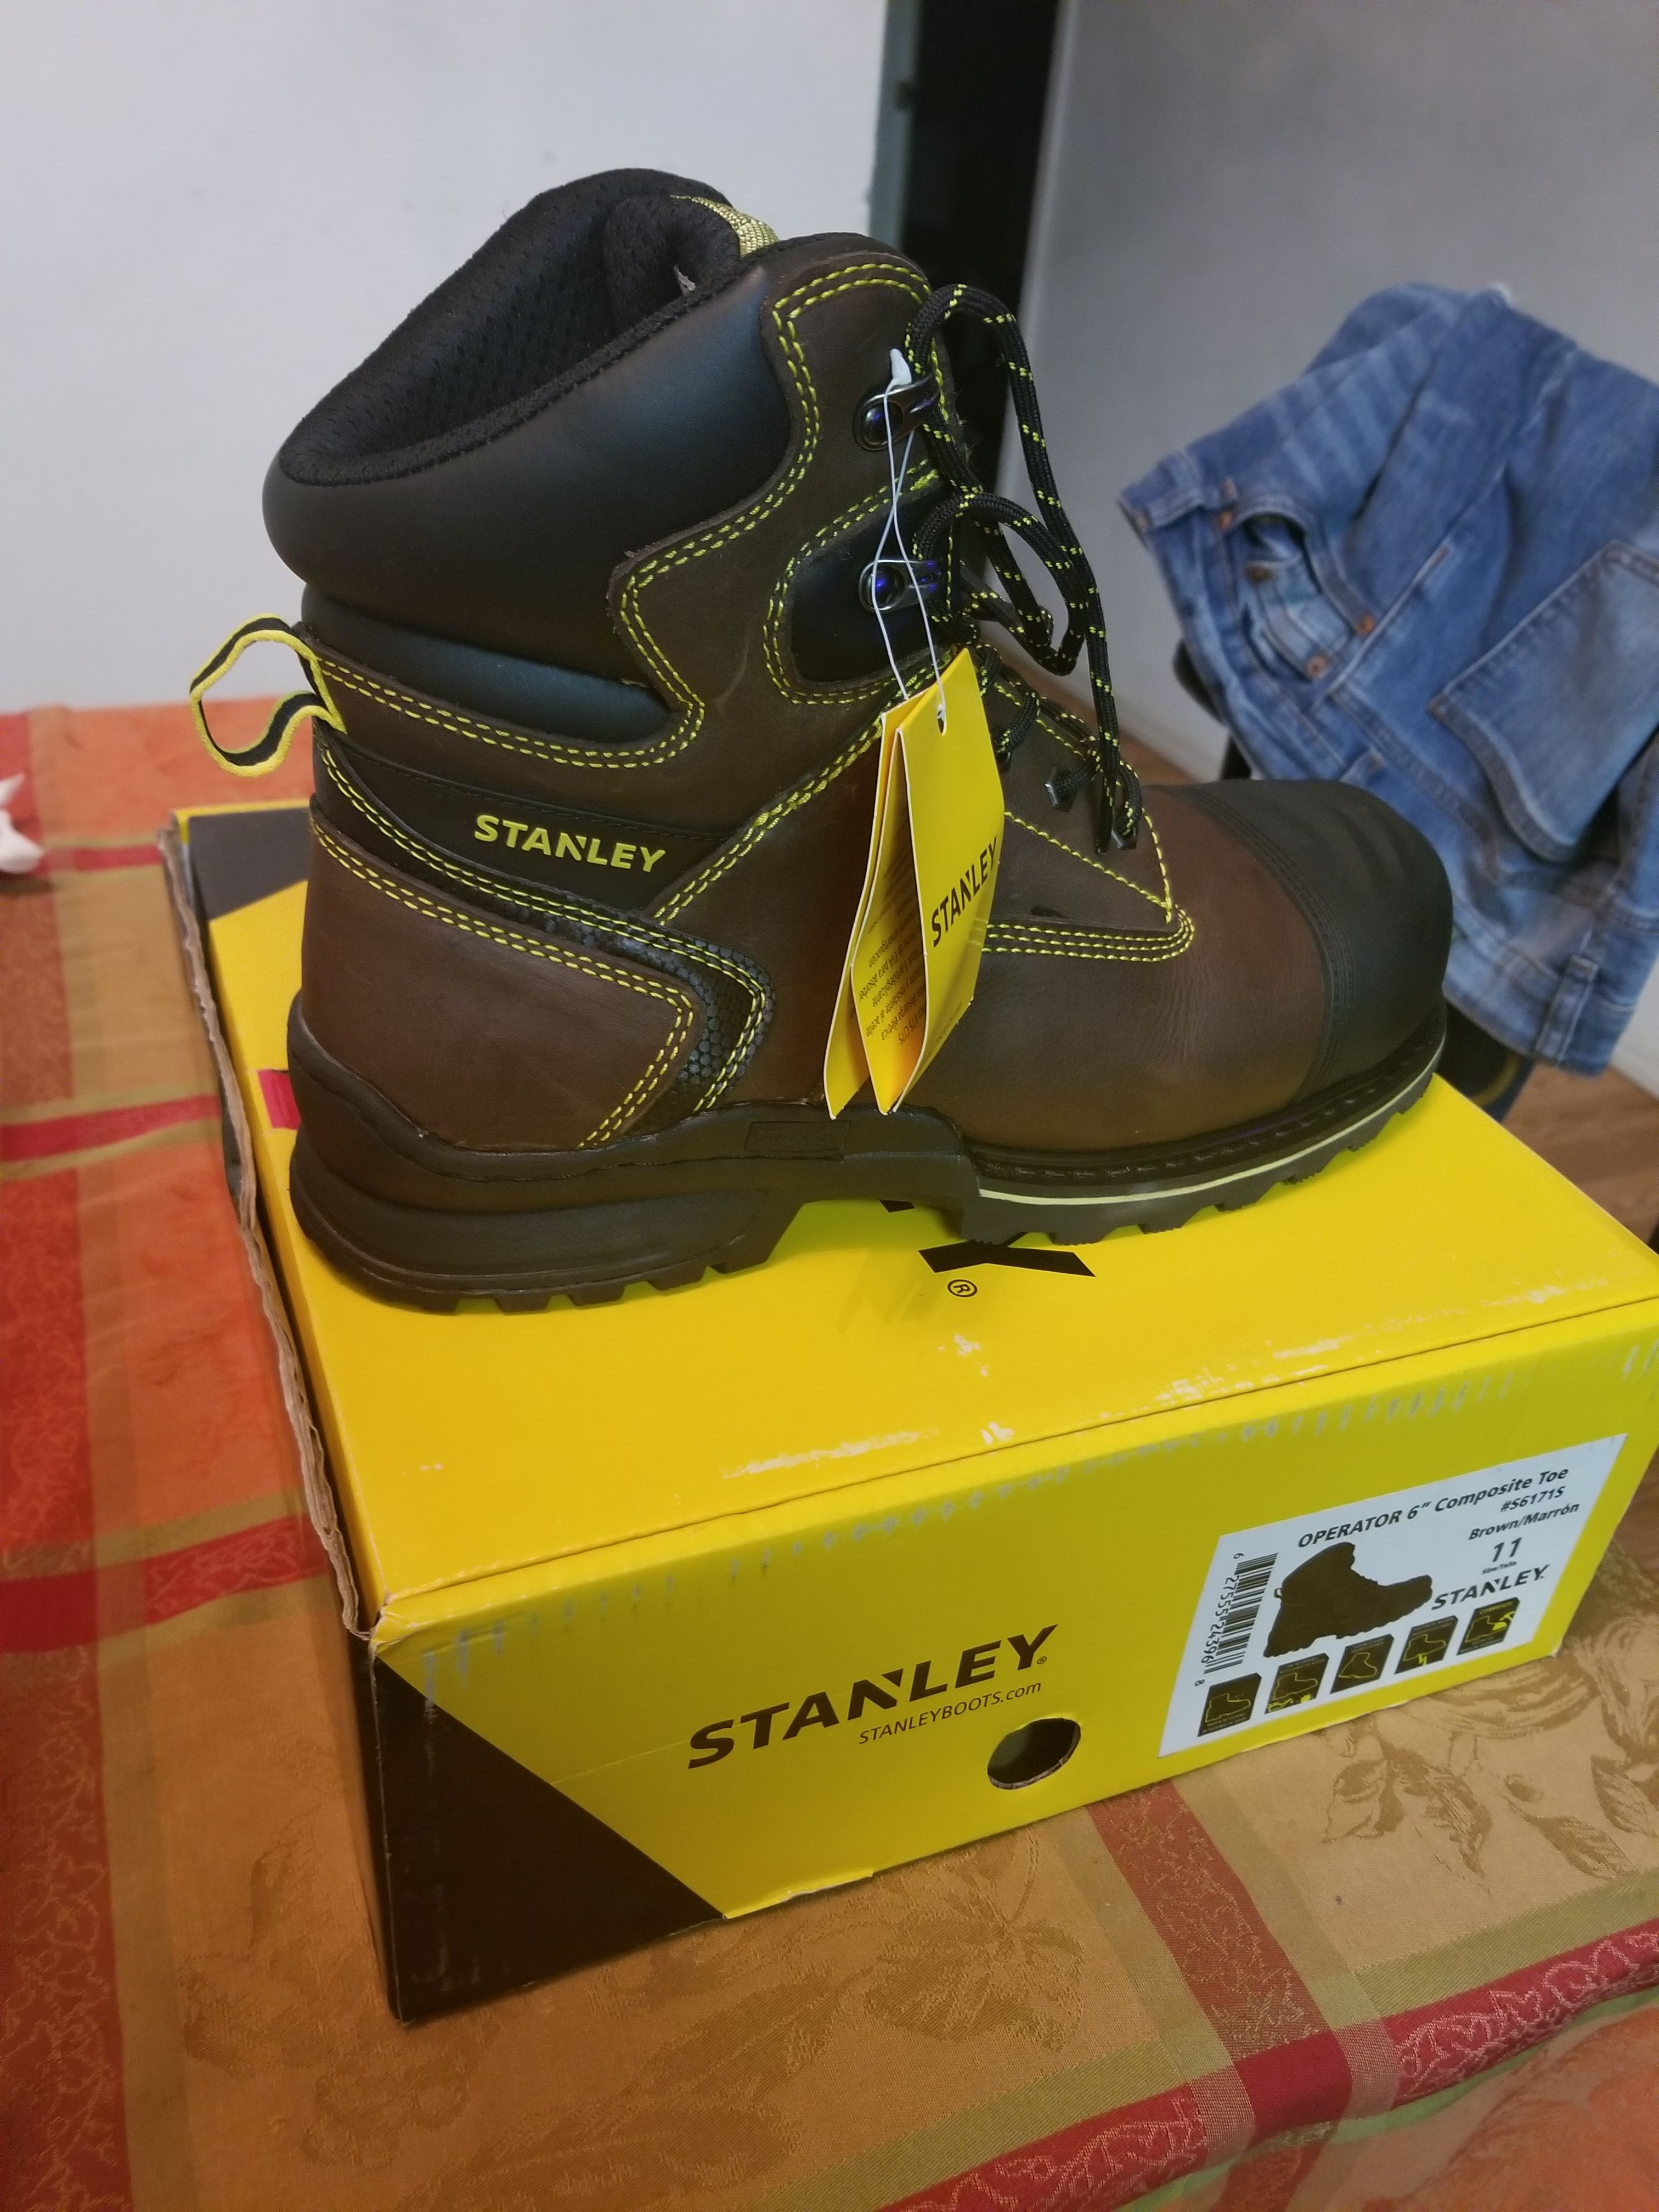 Stanley composite toe boots